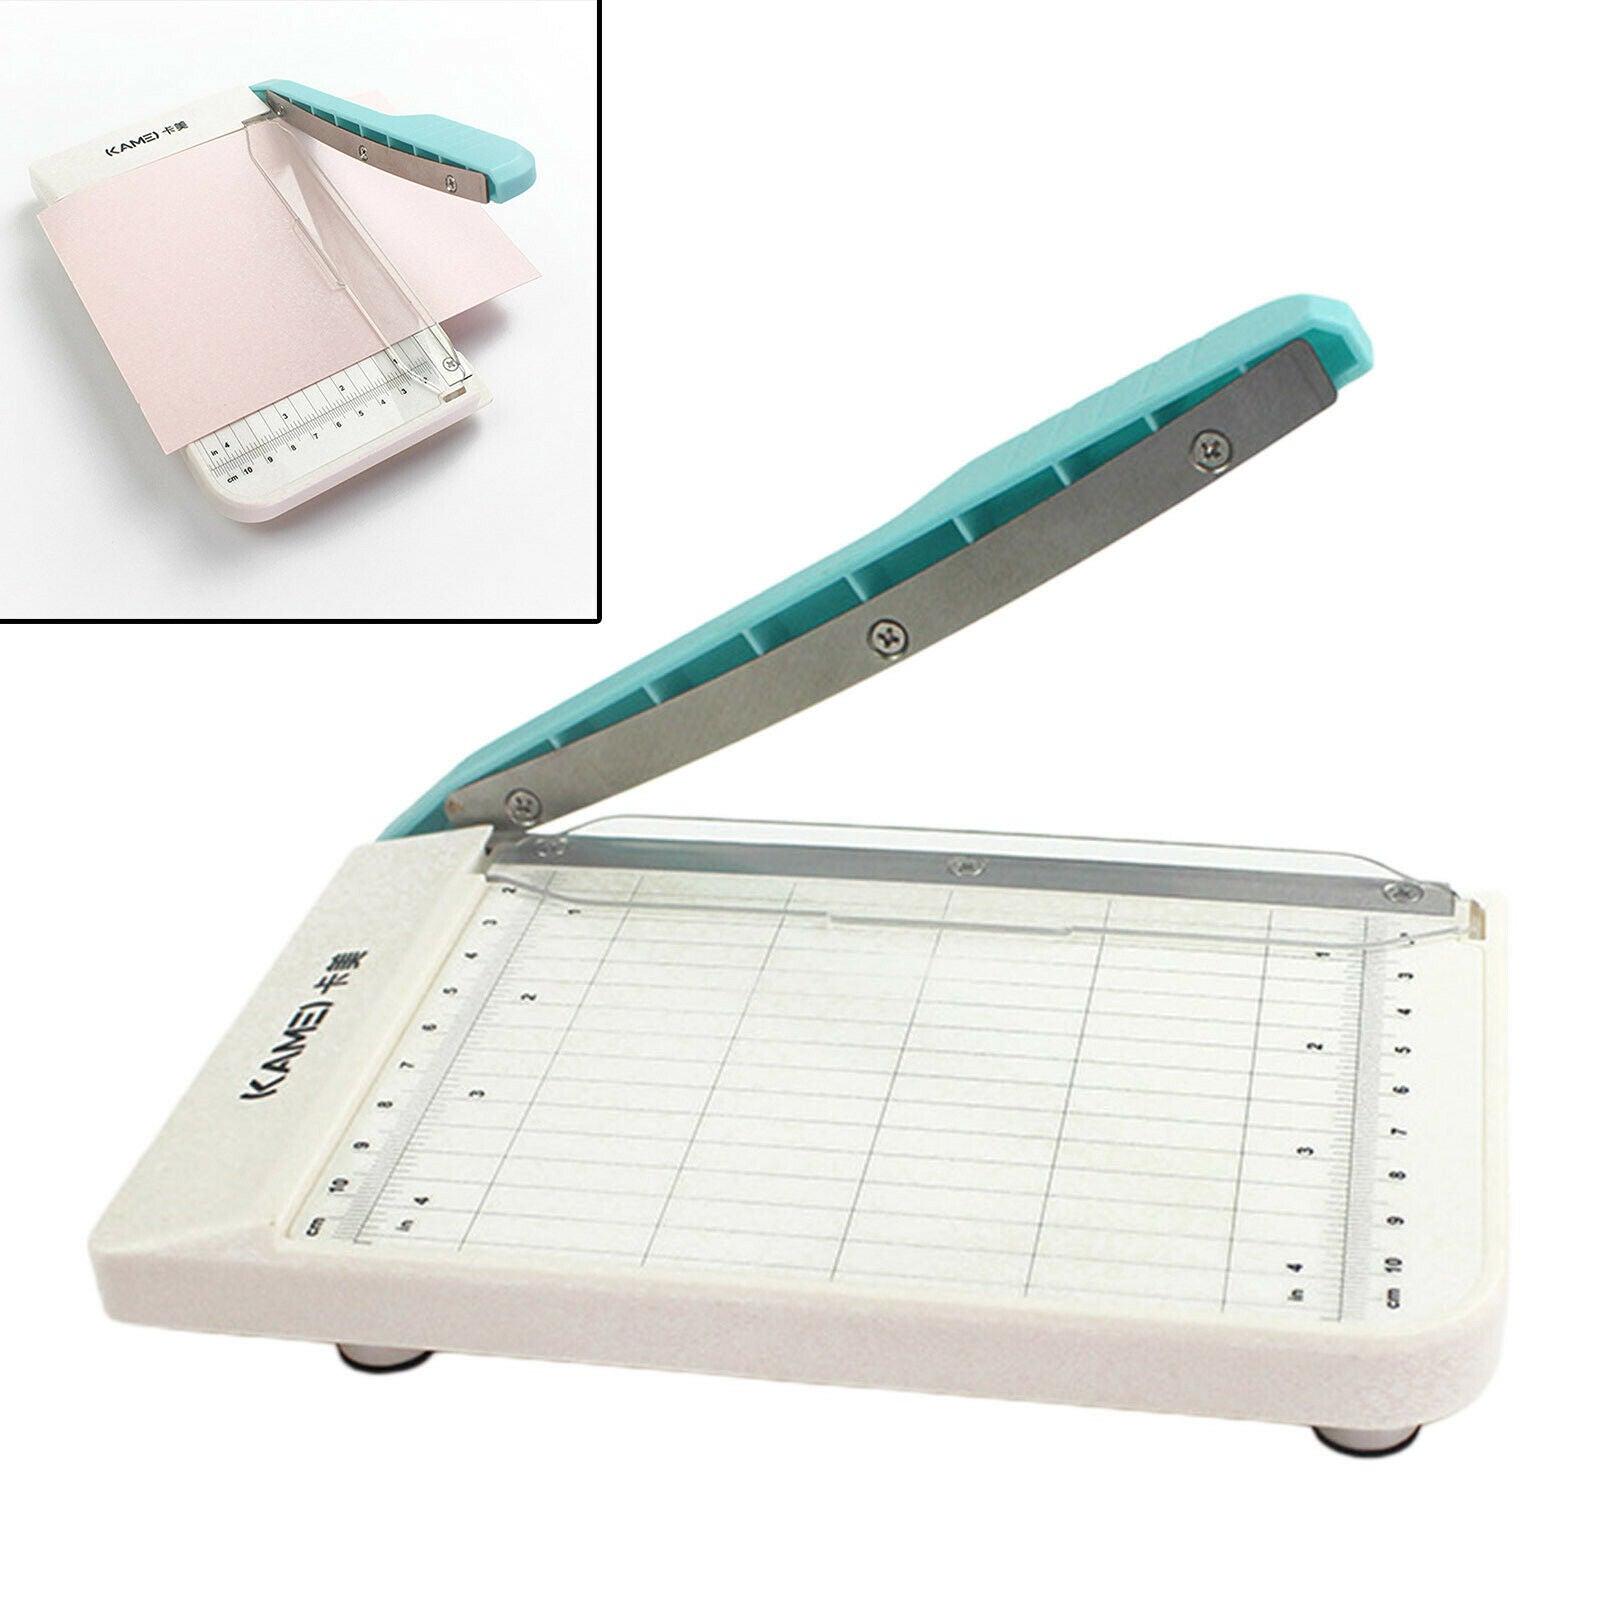 Paper Trimmer Guillotine 10 Sheet Capacity Photo Cutter for Card Home Office